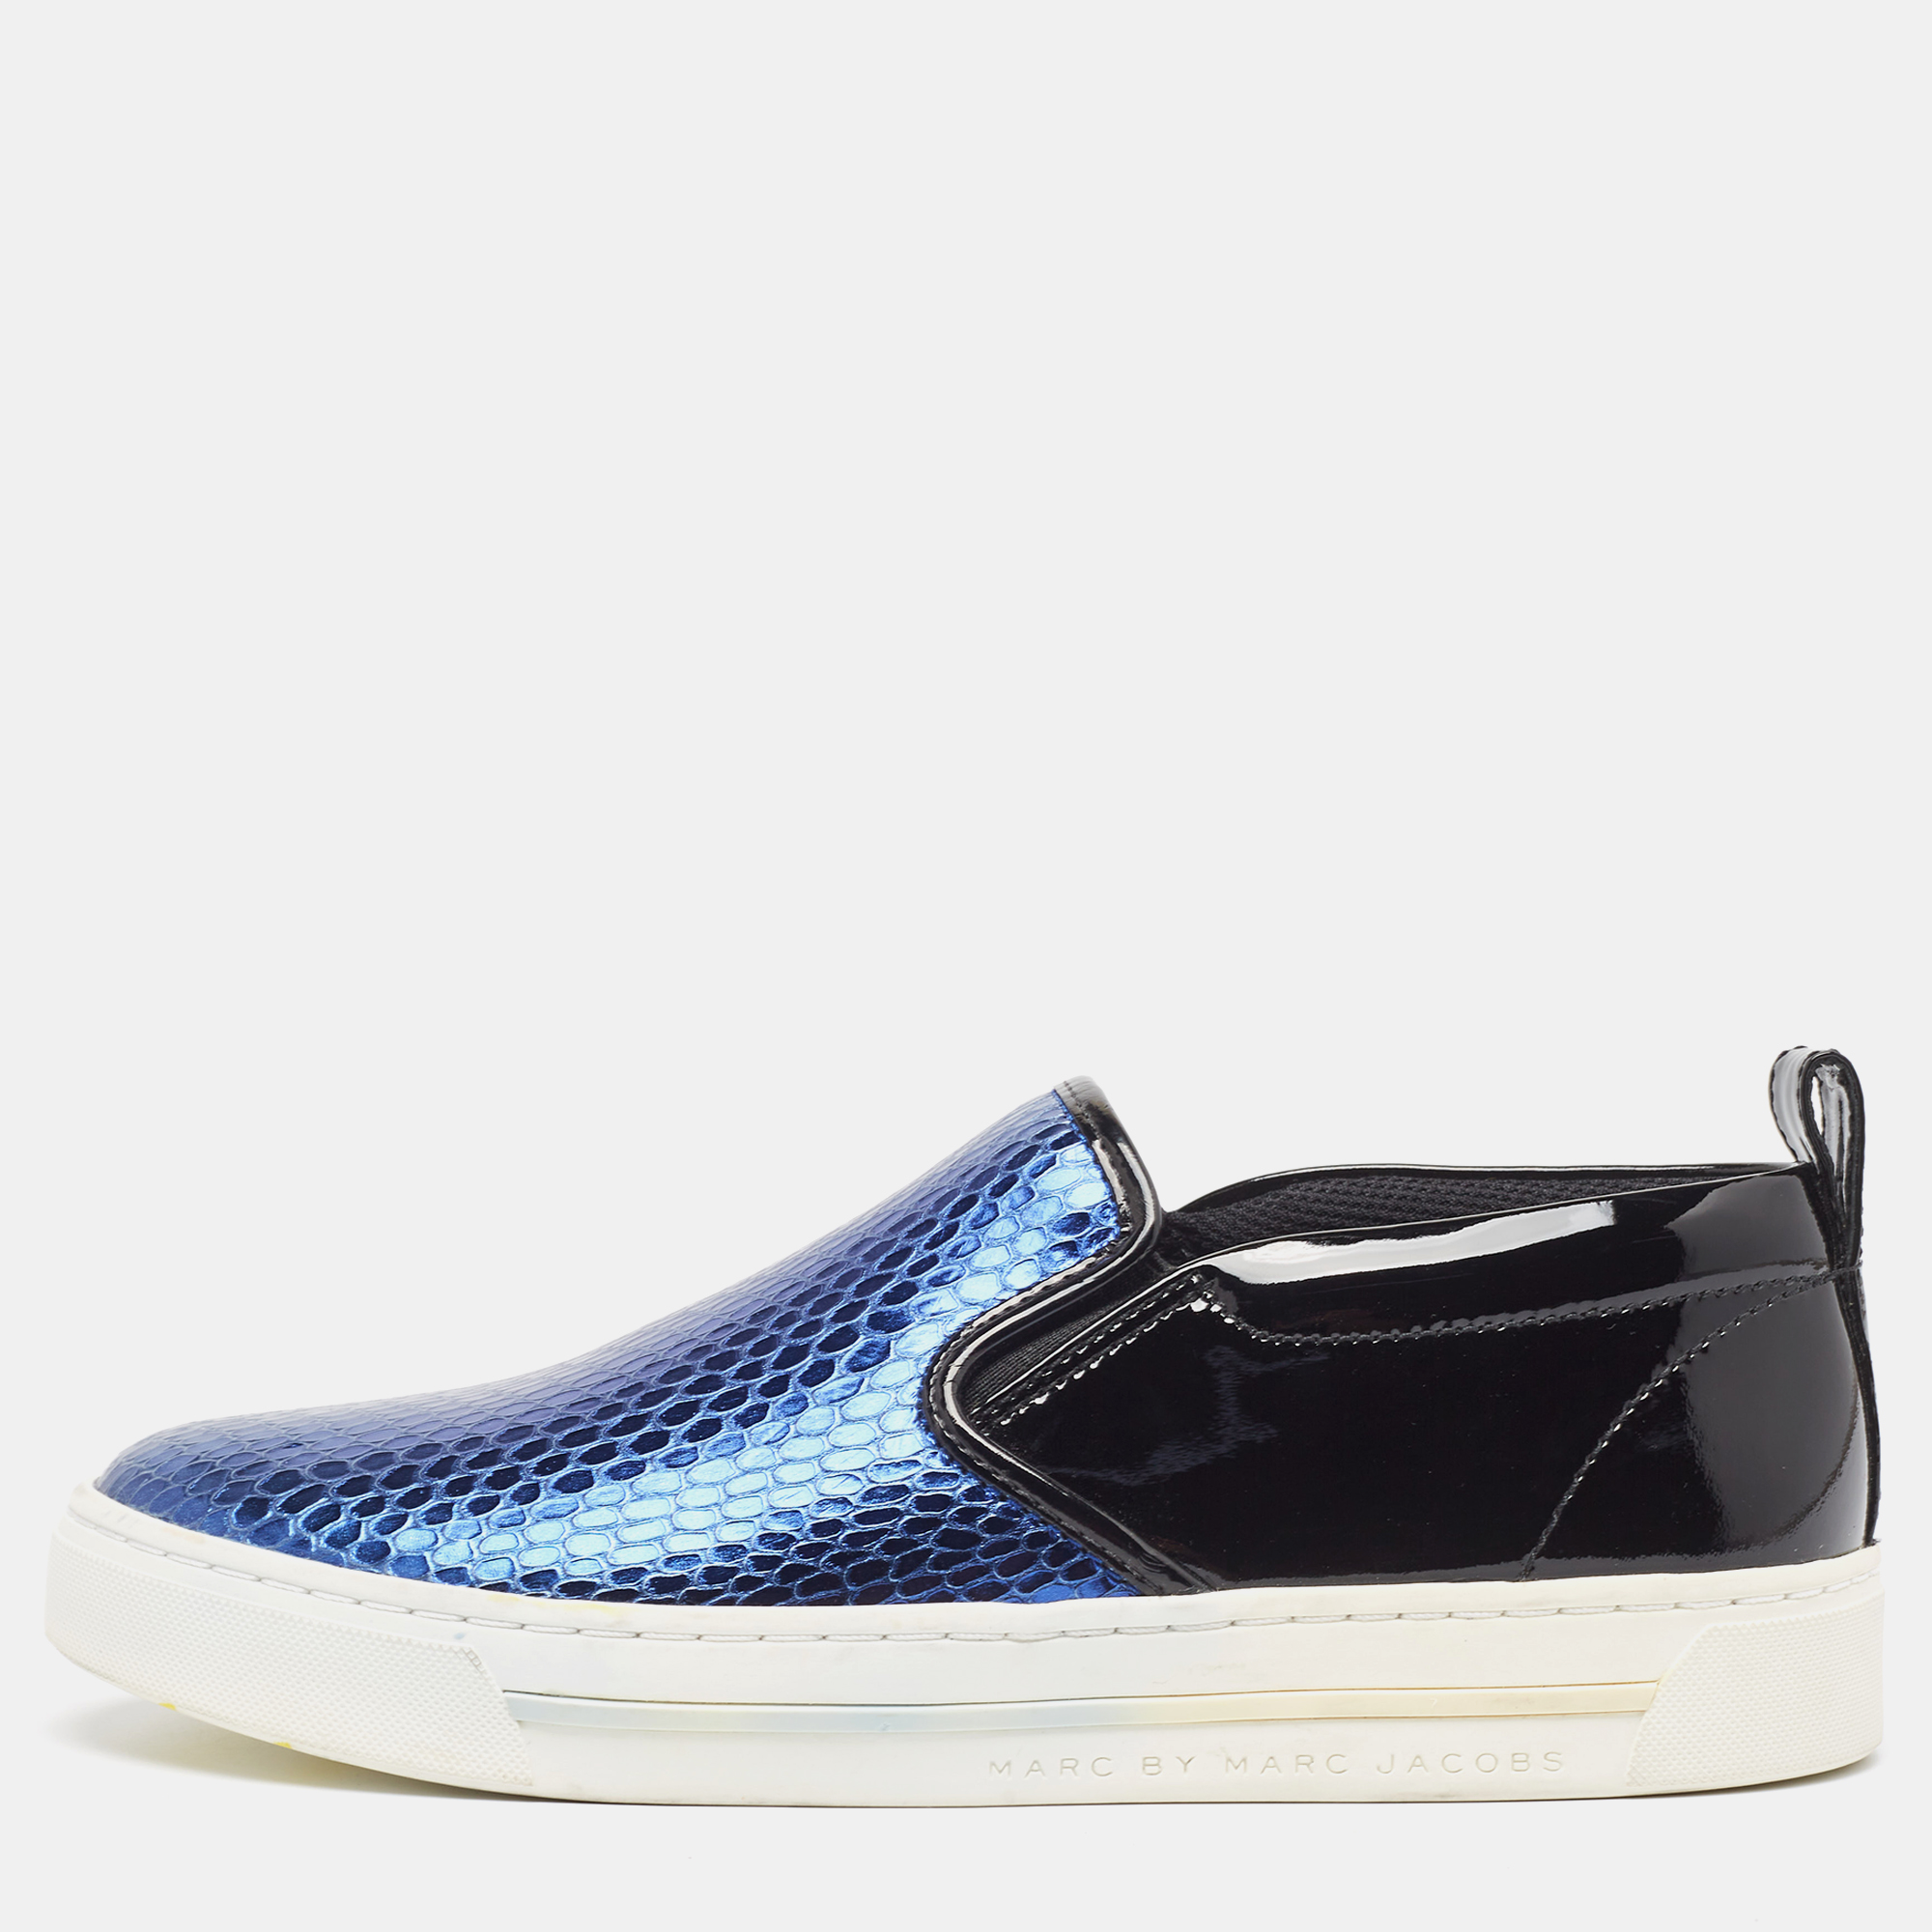 

Marc by Marc Jacobs Blue Python Embossed Leather Broome Sneakers Size